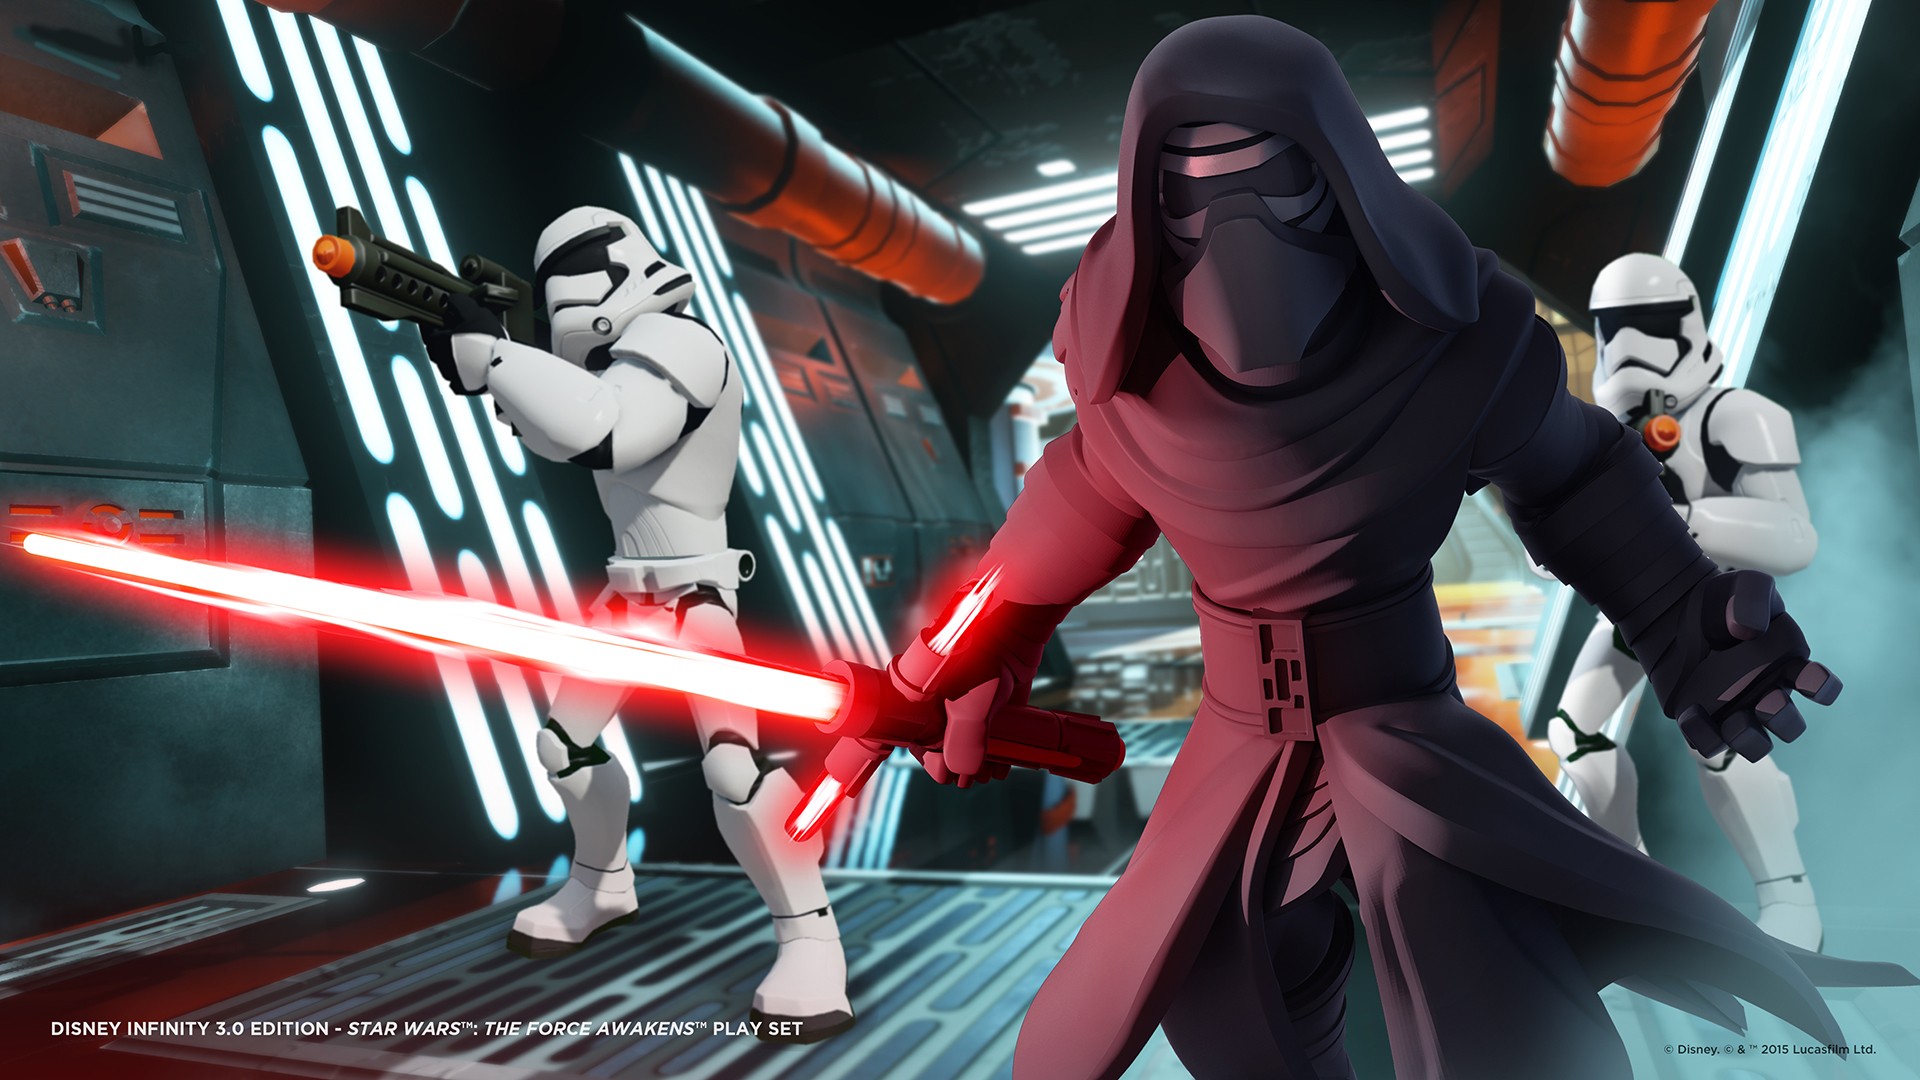 Star Wars The Force Awakens Play Set Comes To Disney Infinity On